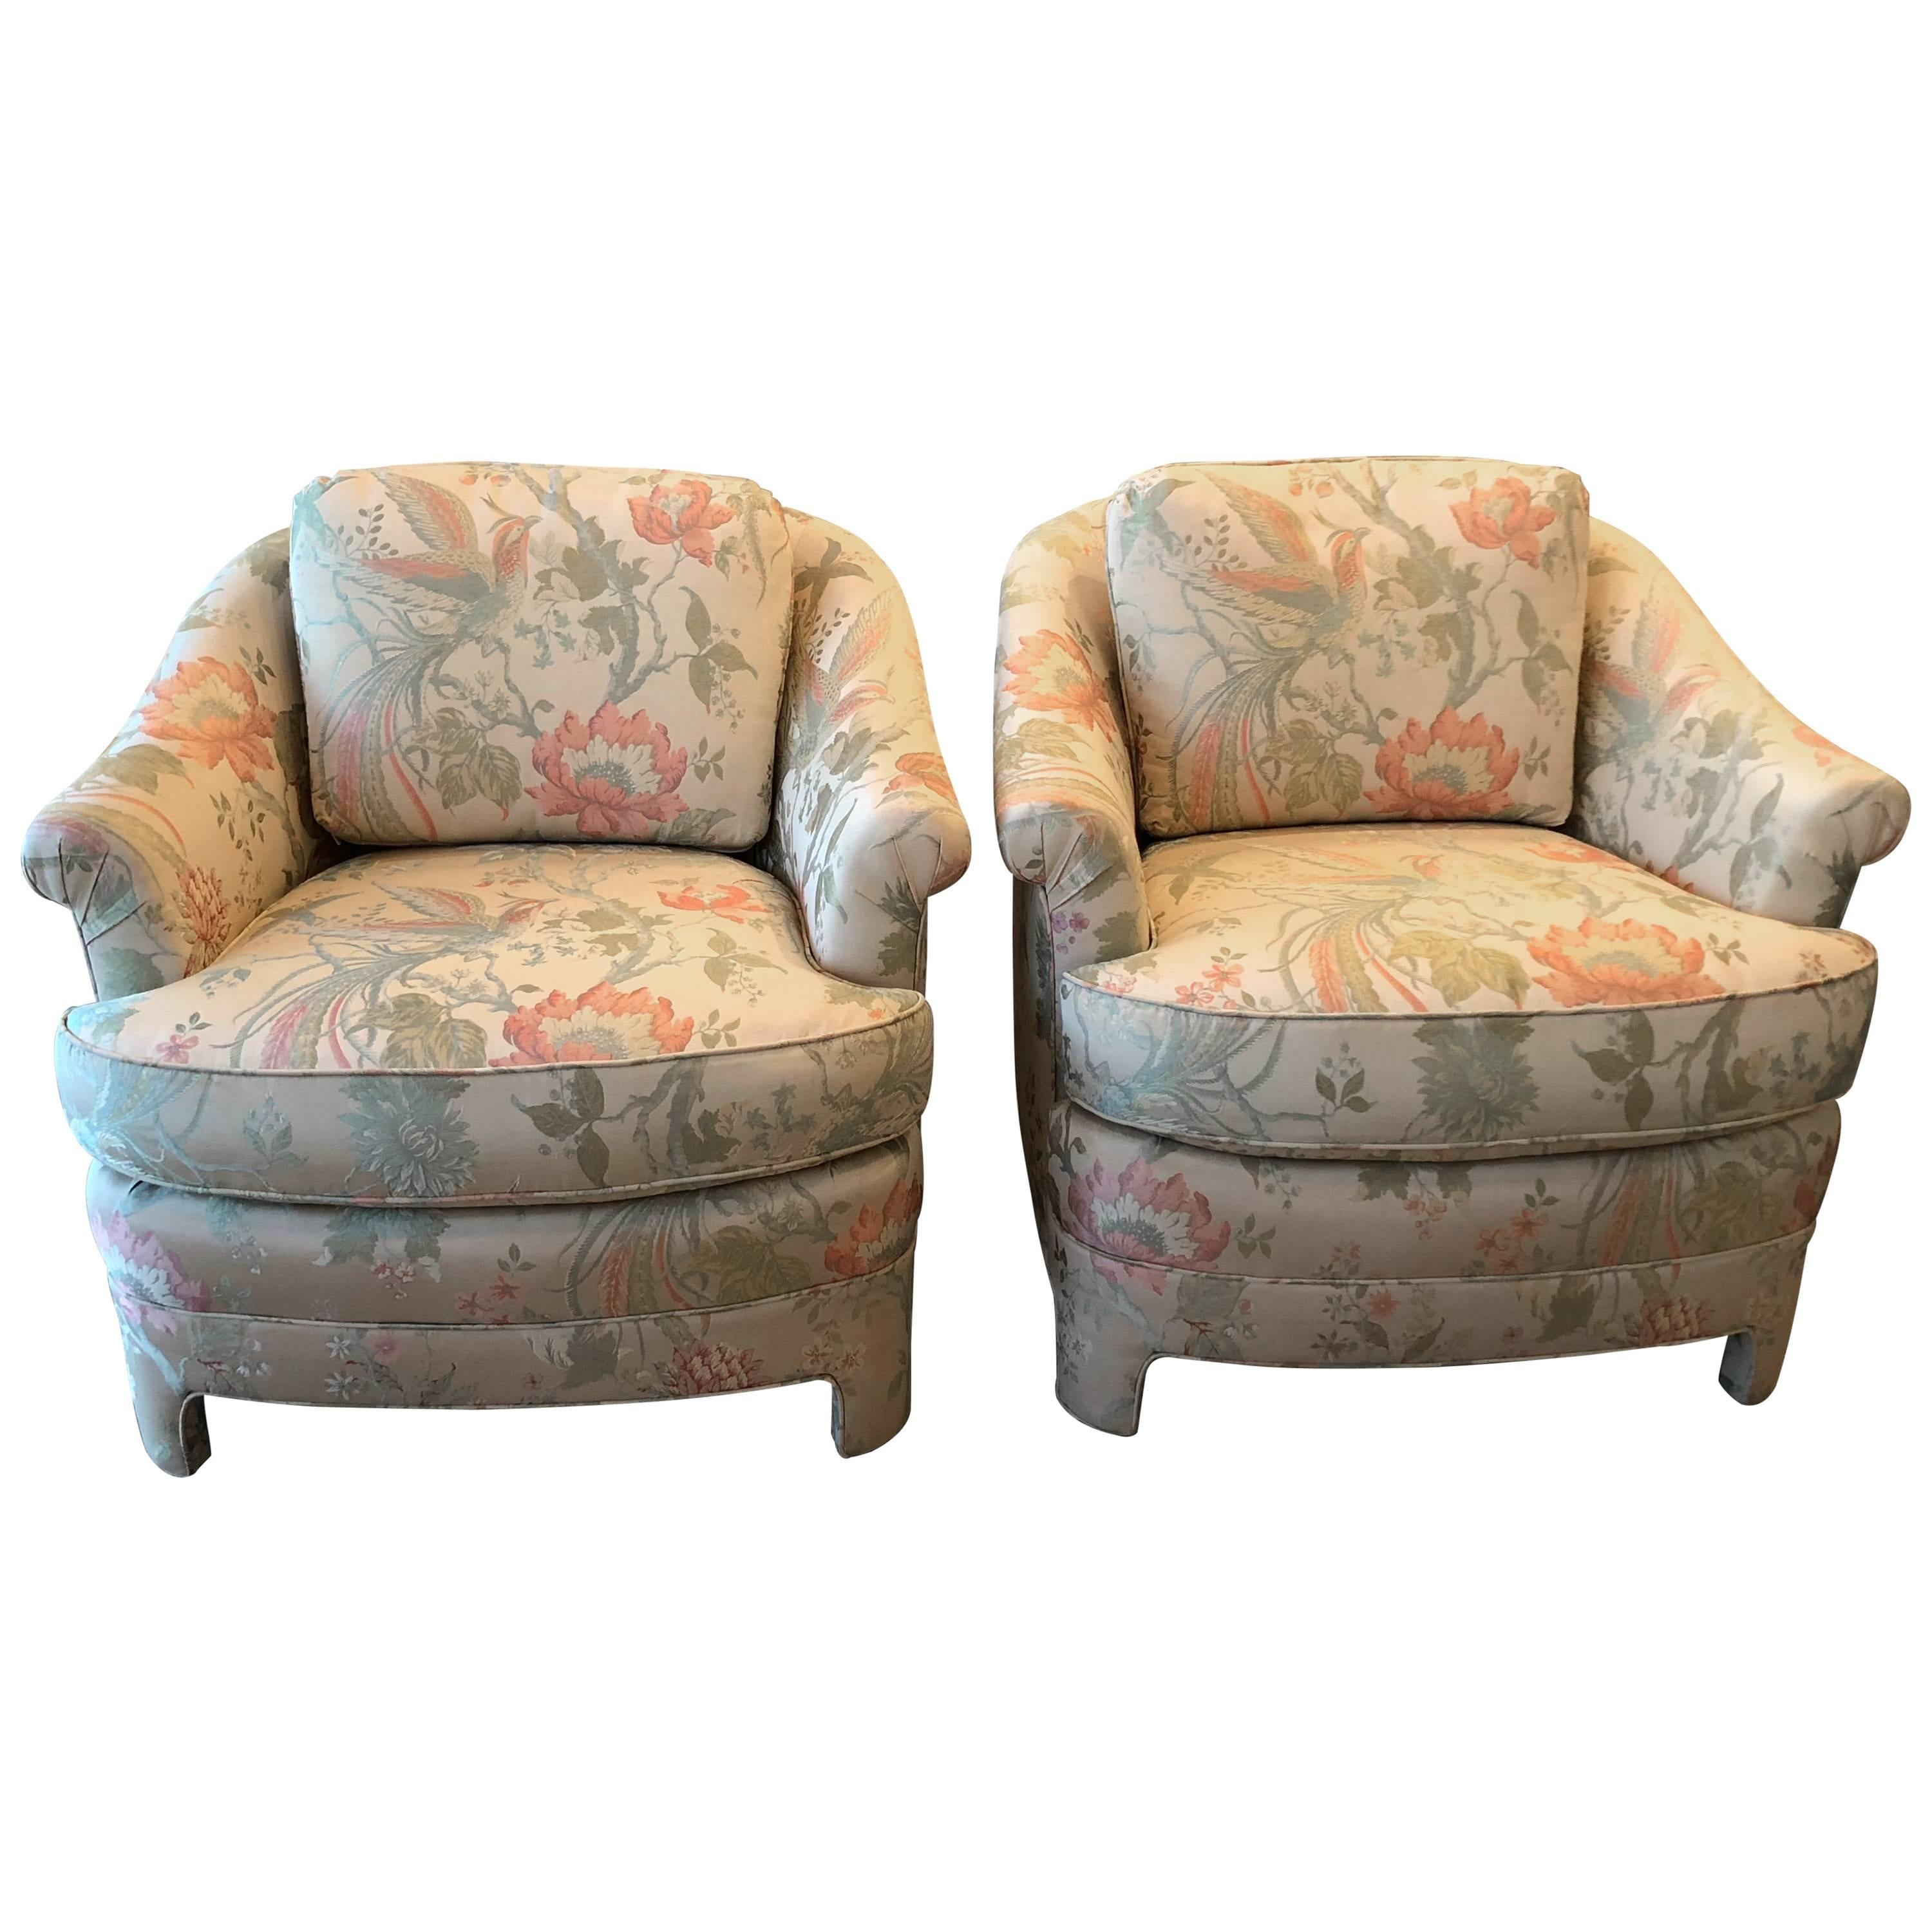 Pair of Vintage Club Tropical Birds Lounge Armchairs Arm Chairs Chinoiserie